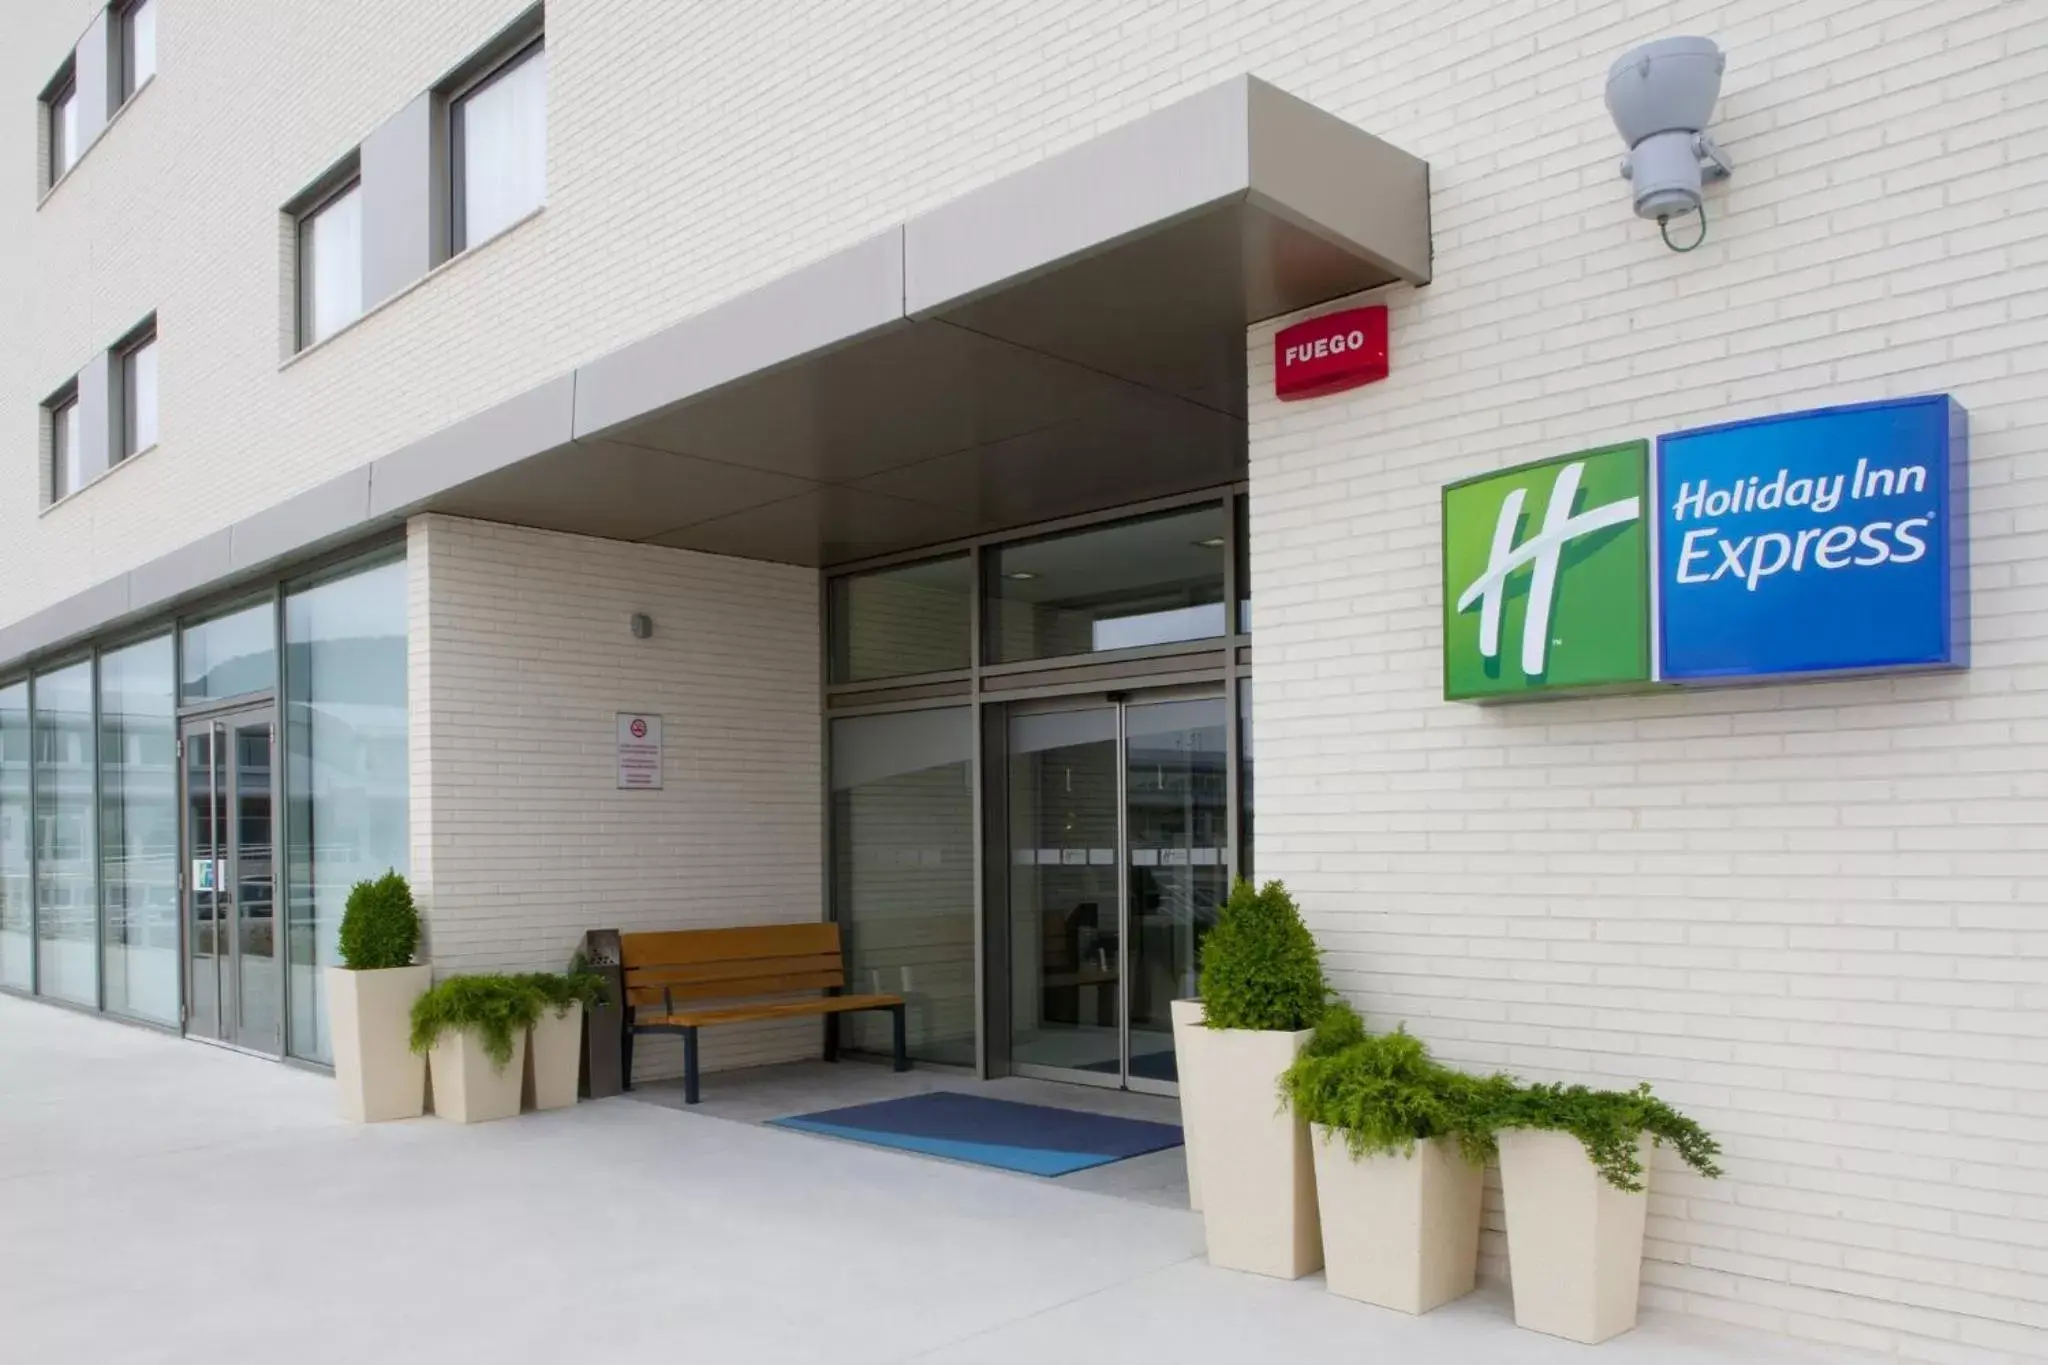 Property building in Holiday Inn Express Vitoria